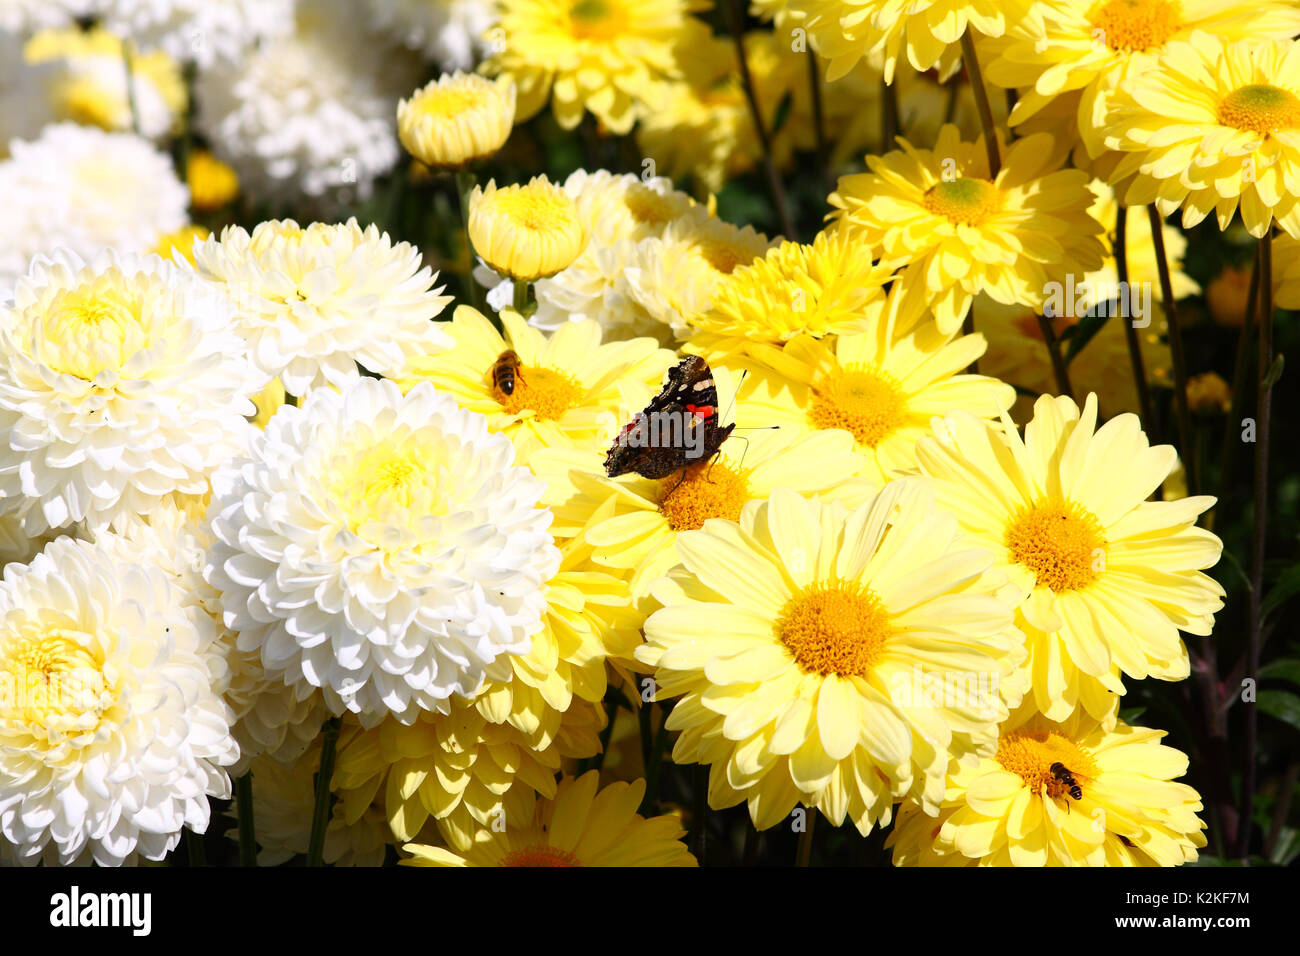 Leeds, UK. 31st Aug, 2017. UK Weather. Insects were busy pollinating the beautiful flowers at Golden Acre Park in Leeds, West Yorkshire when the sun came out this afternoon. Taken on the 31st August 2017. Credit: Victoria Gardner/Alamy Live News Stock Photo